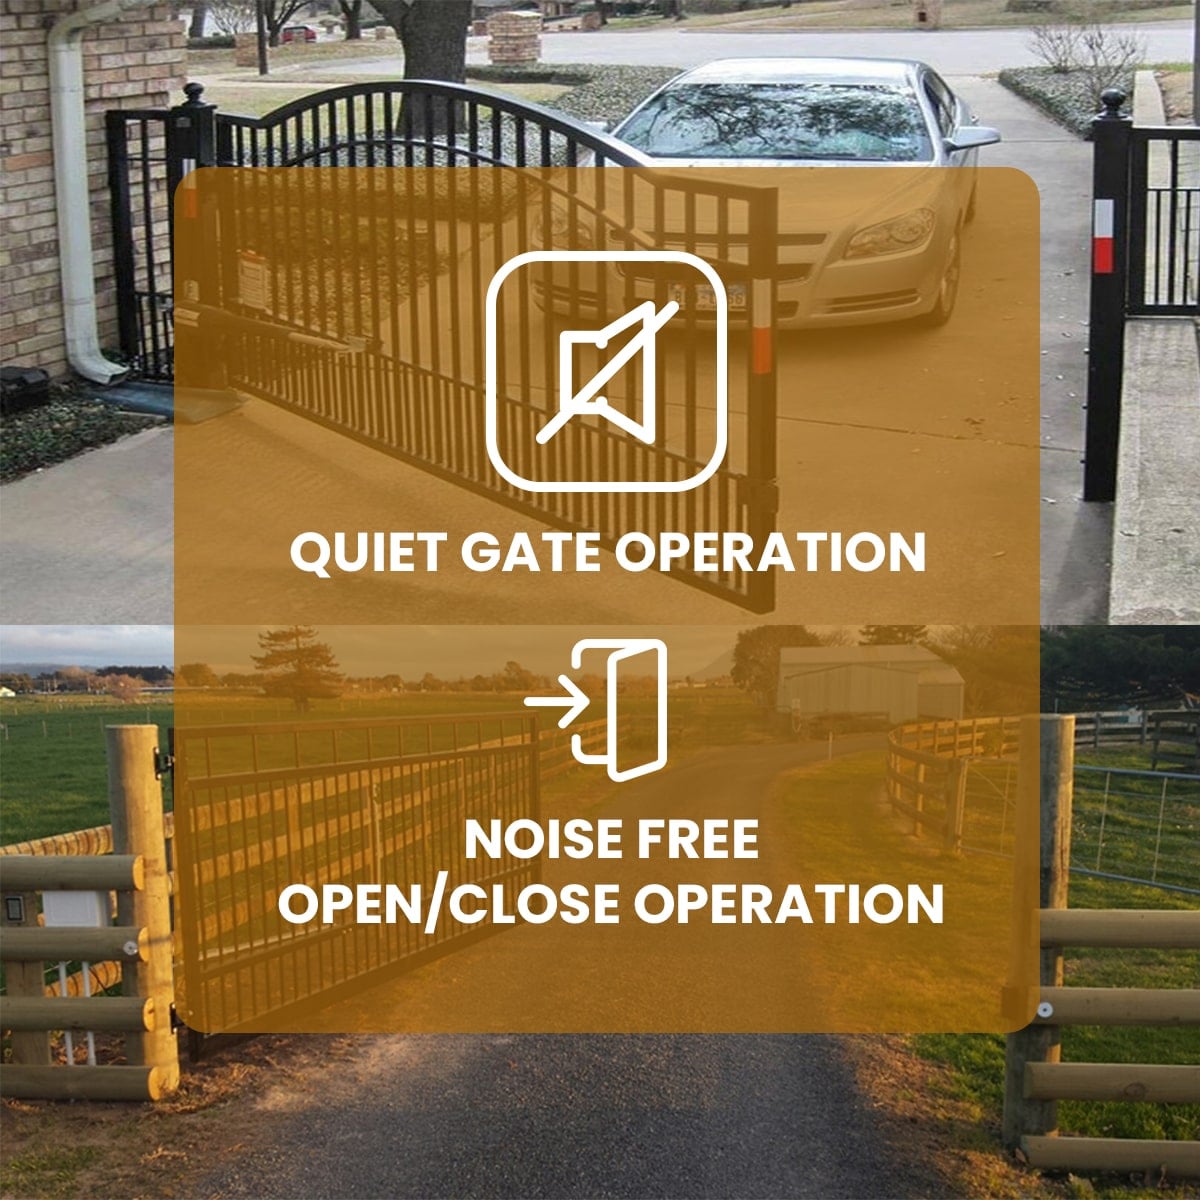 Electric, Double, Swing, Gate Opener, Remote Programming, WiFi Phone App Included, gatomate